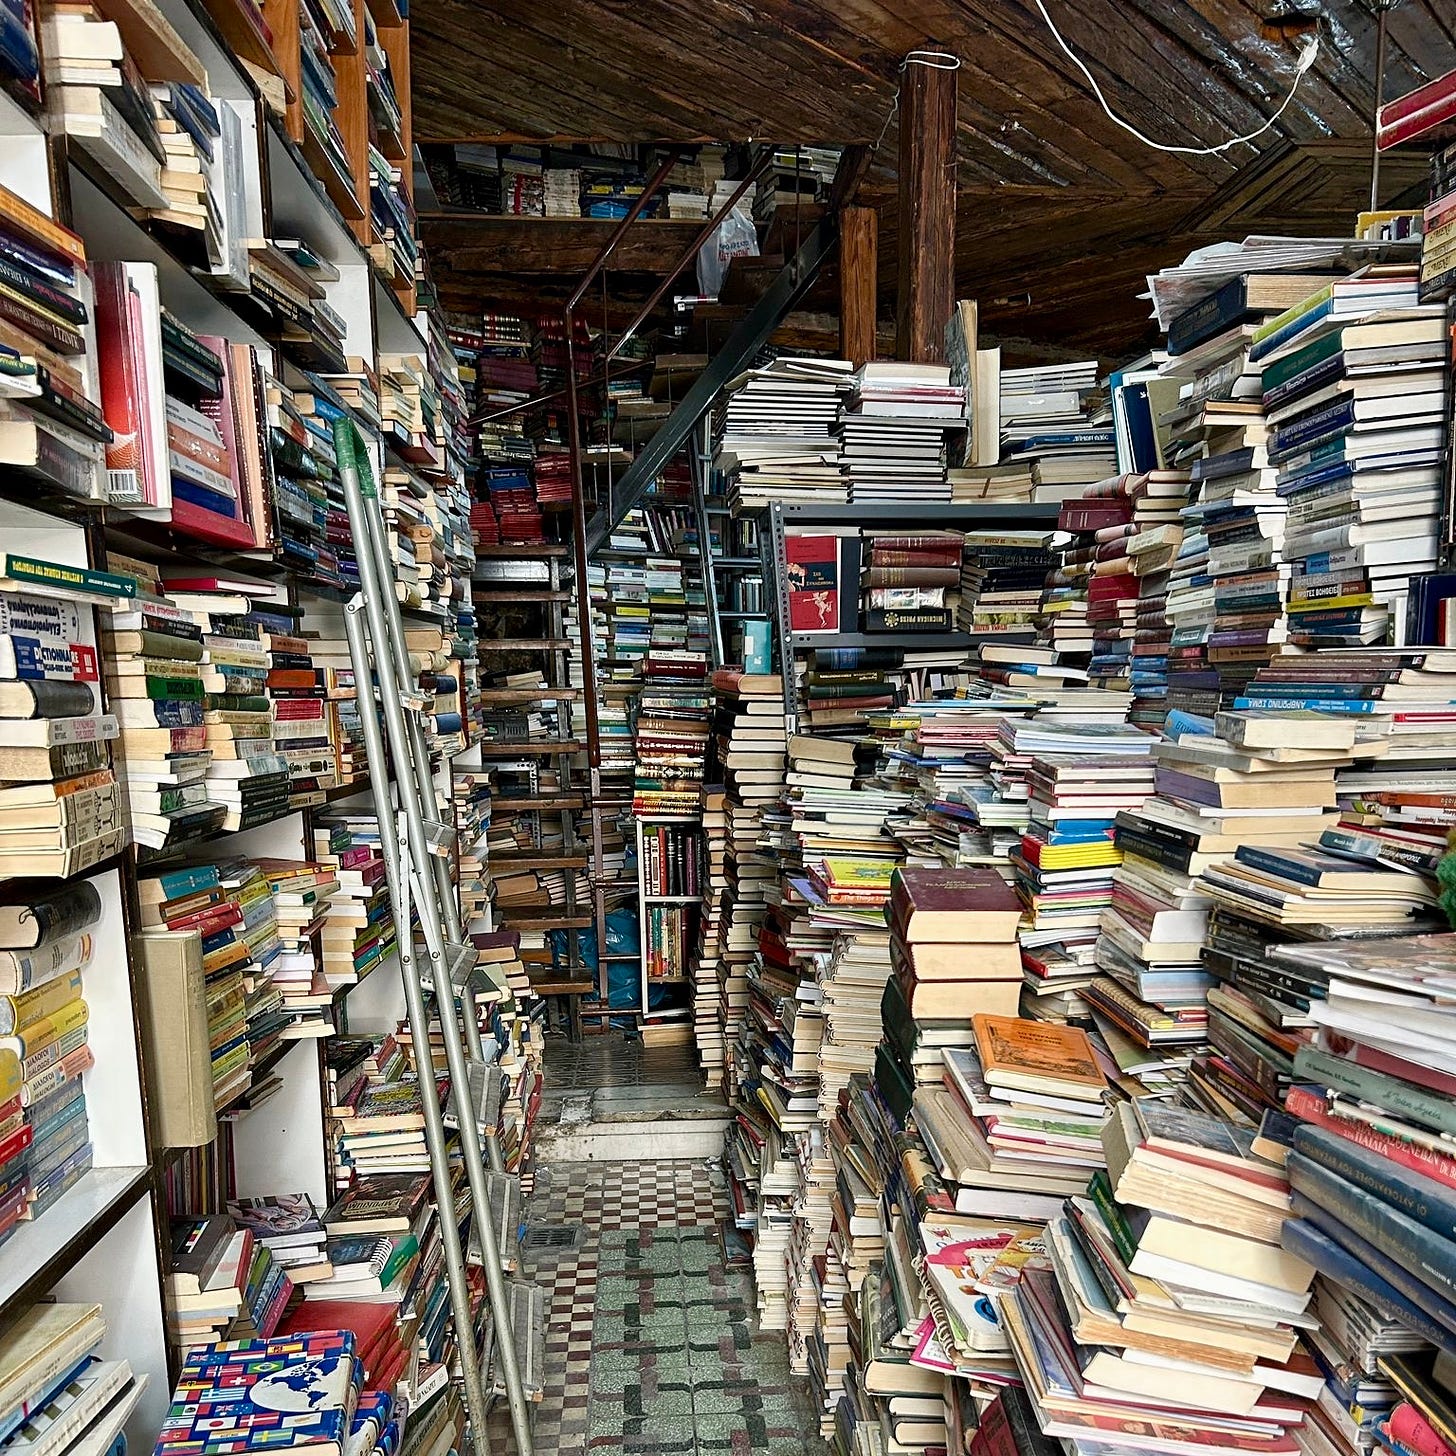 A bookstore positively stacked with books!